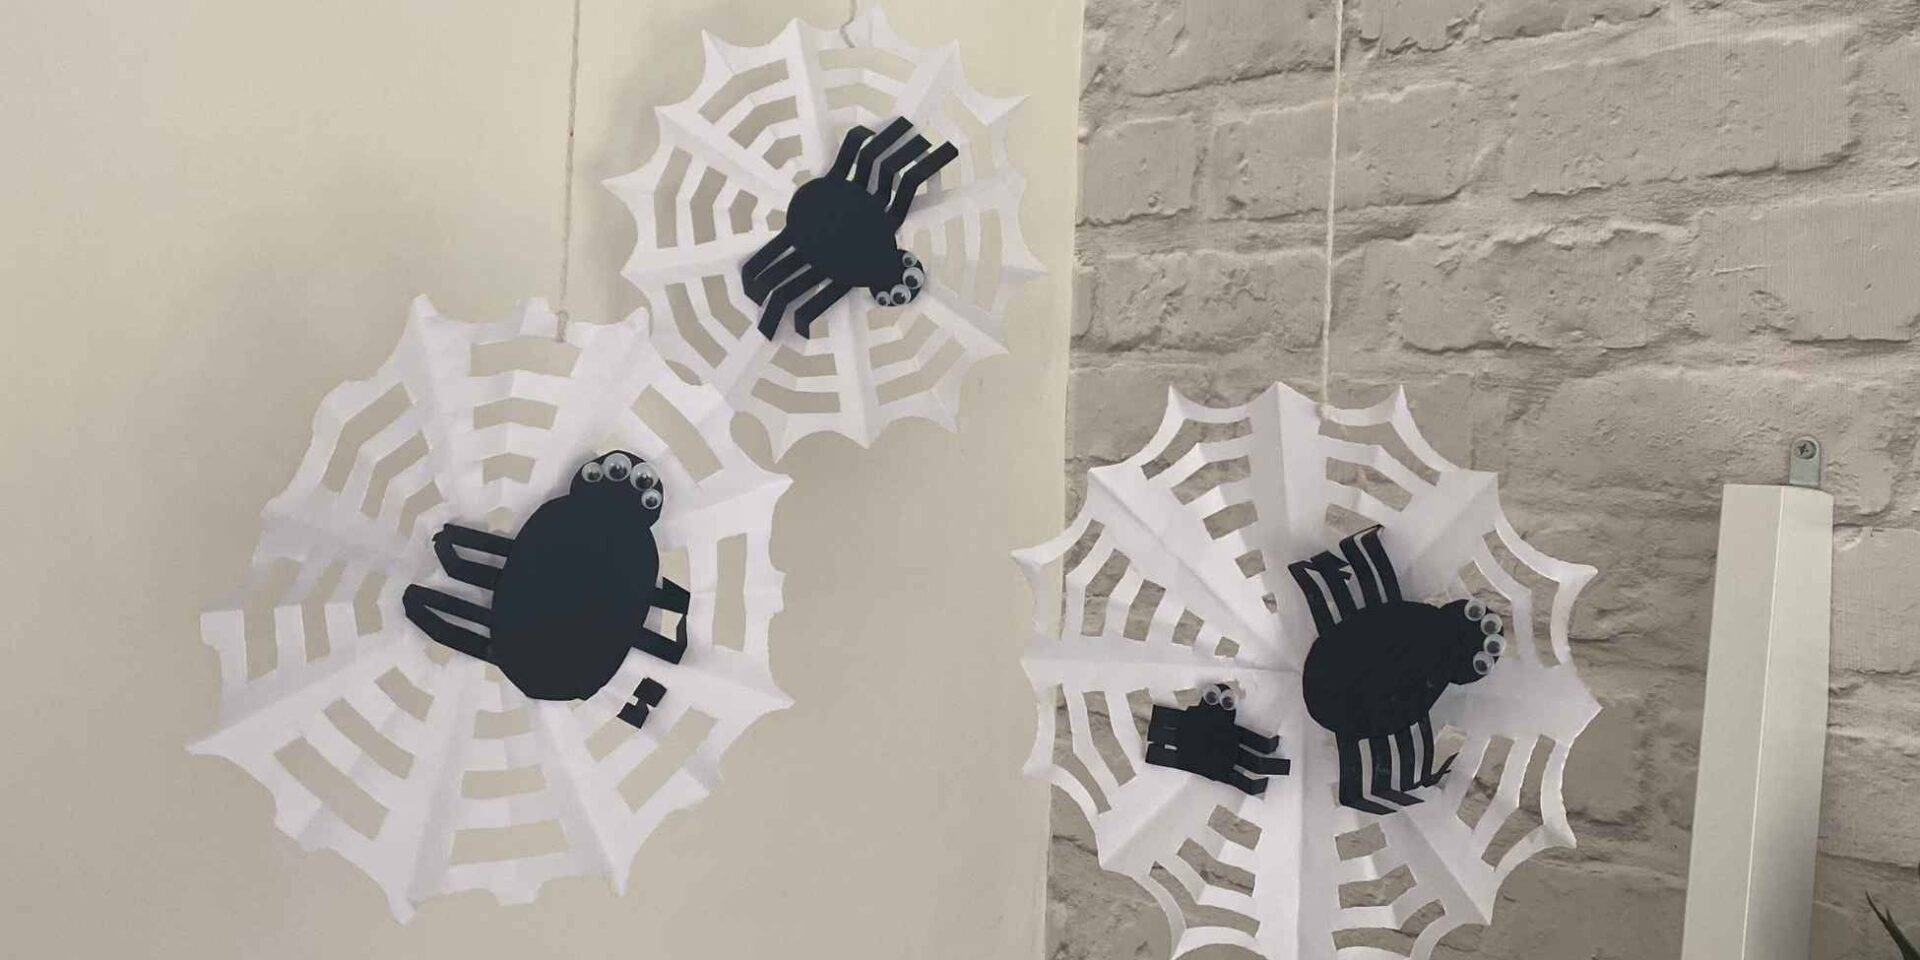 Make and talk activity: Make a paper spider and spider web